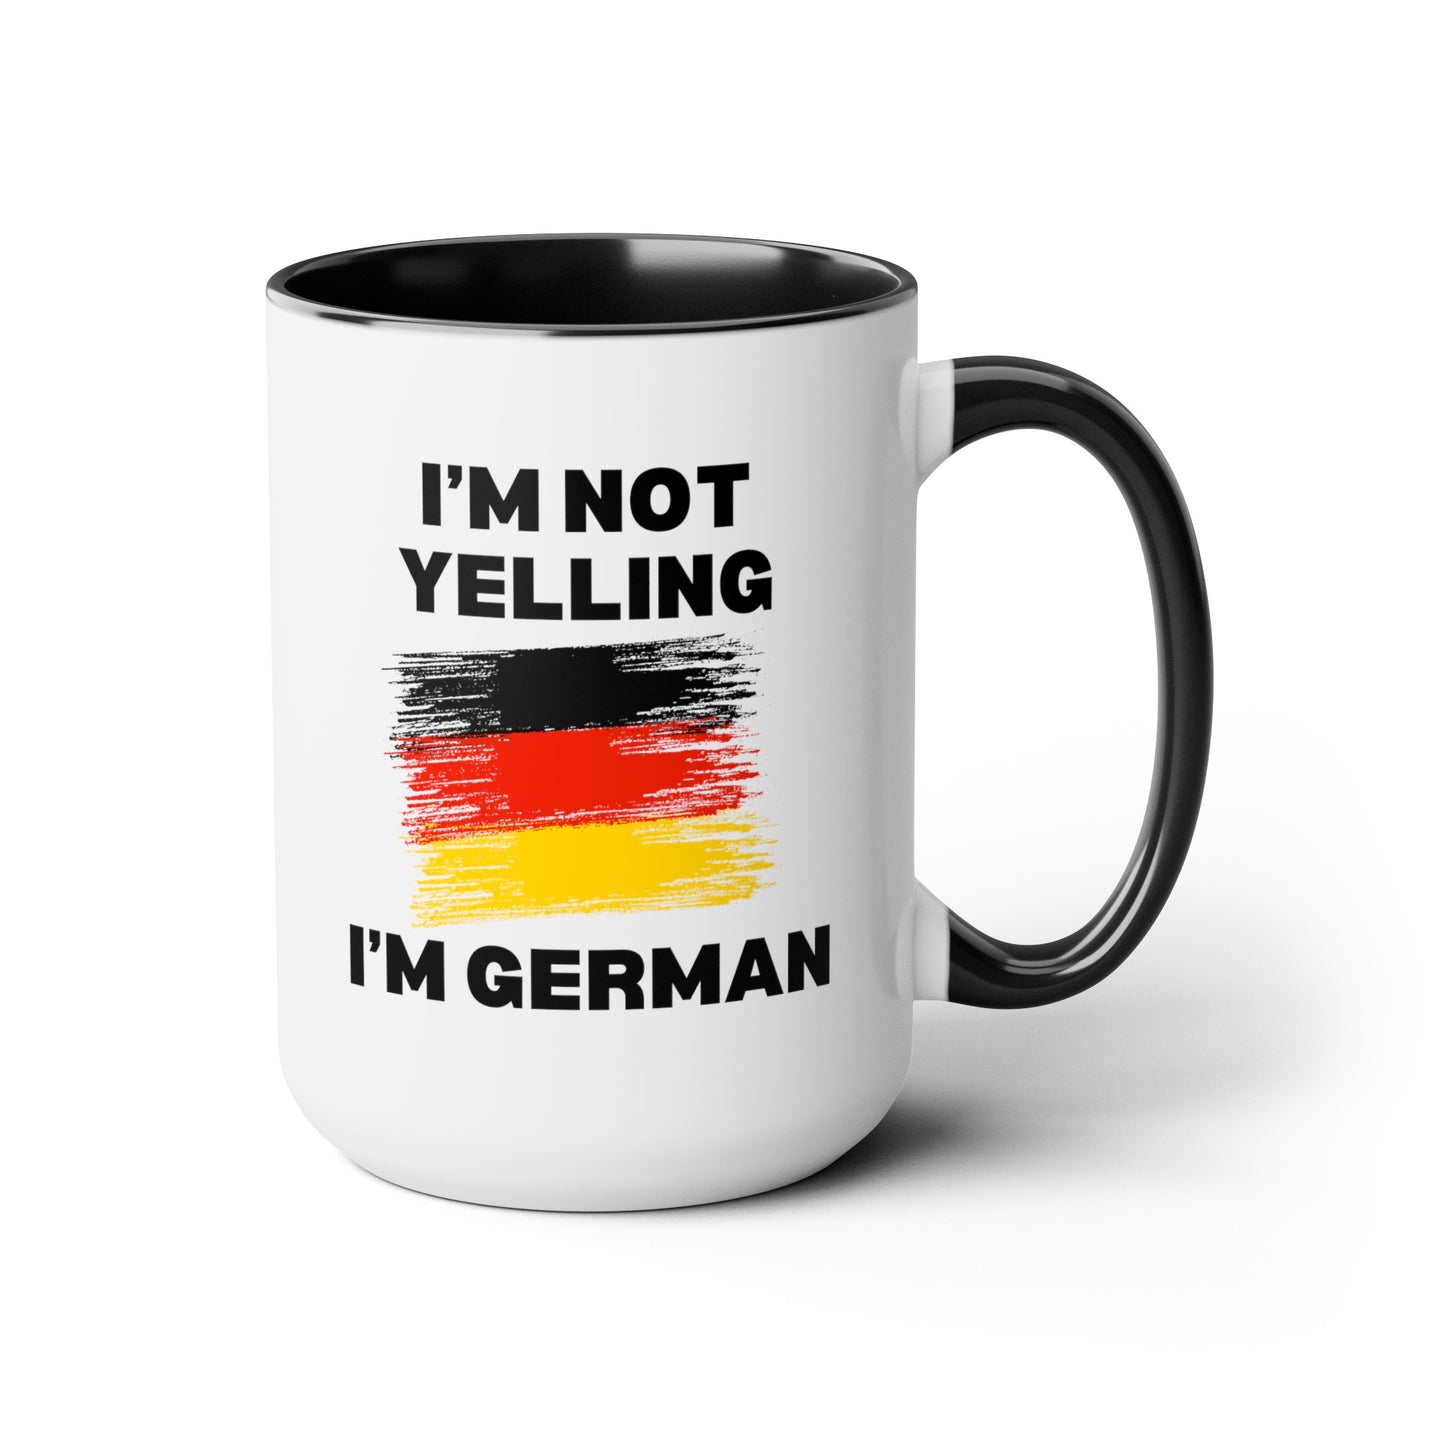 I'm Not Yelling I'm German 15oz white with black accent funny large coffee mug gift for deutsch friend flag germany deutschland birthday waveywares wavey wares wavywares wavy wares